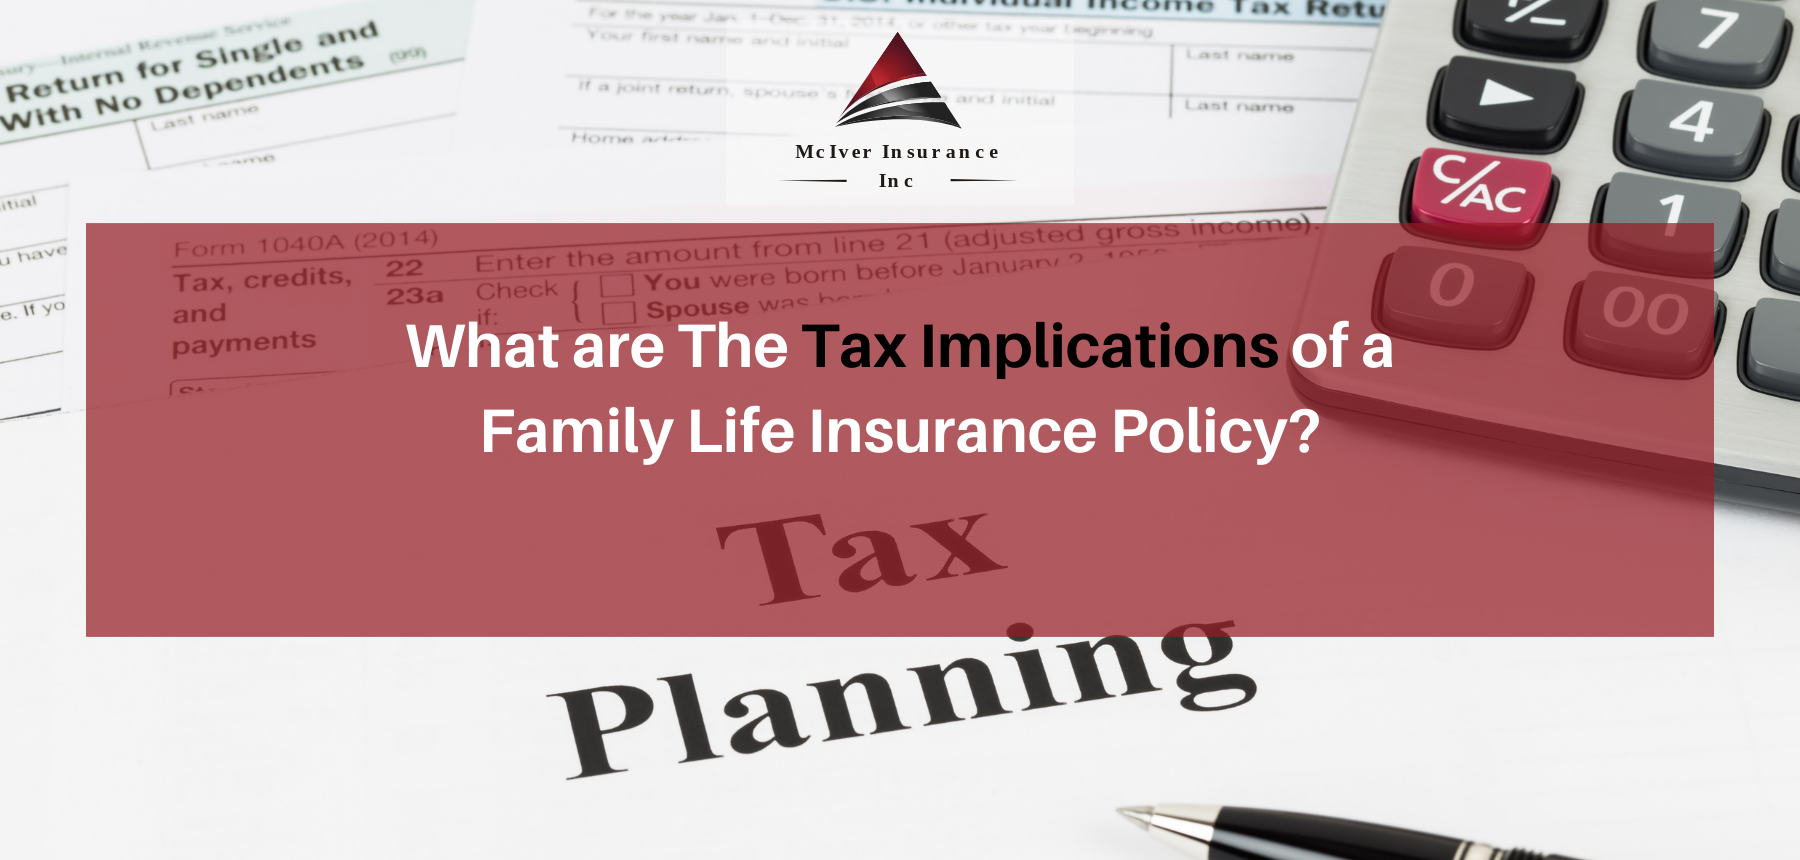 What are The Tax Implications of a Family Life Insurance Policy